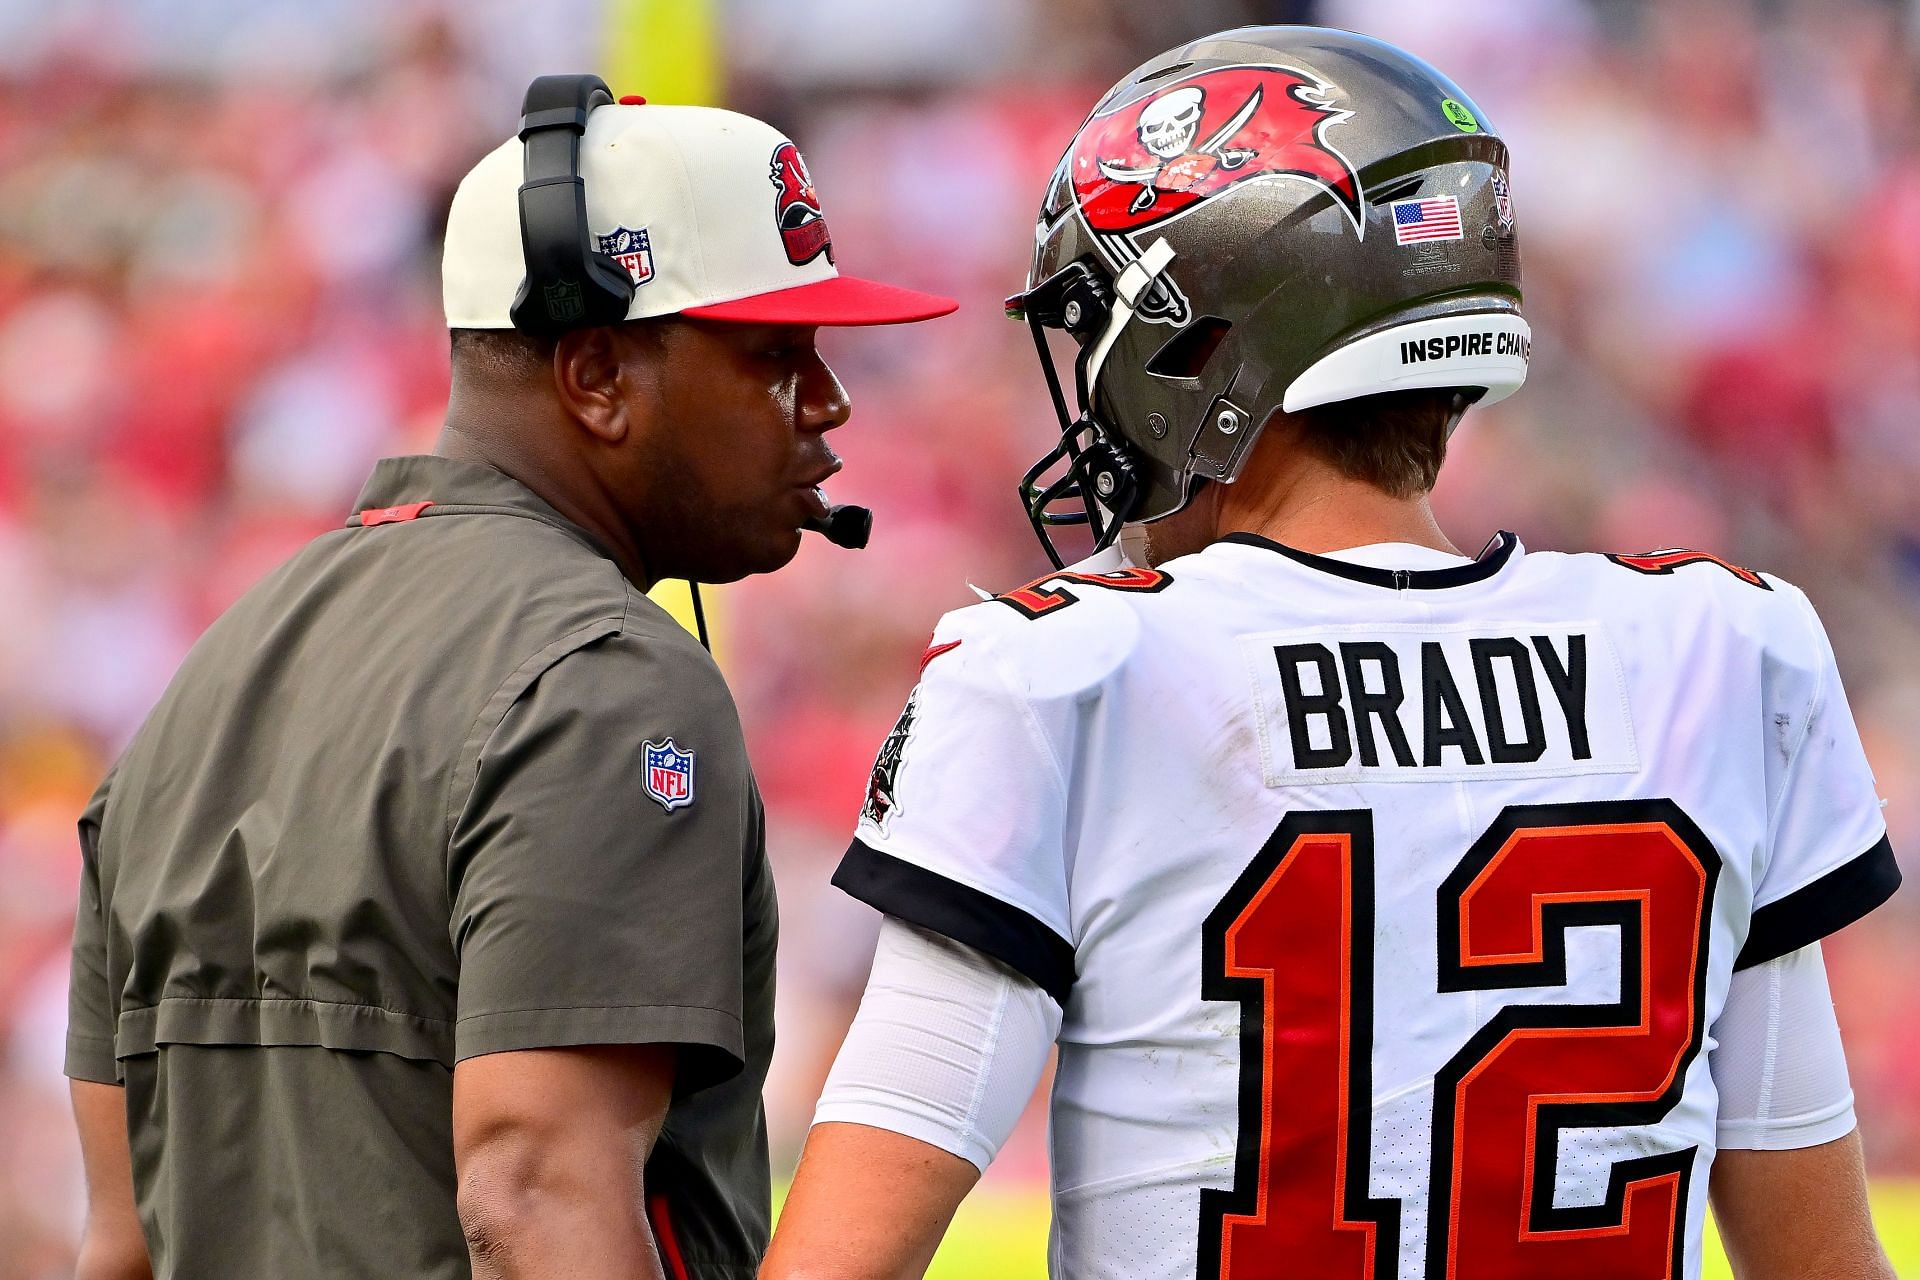 Byron Leftwich could be fired after Buccaneers' rough season